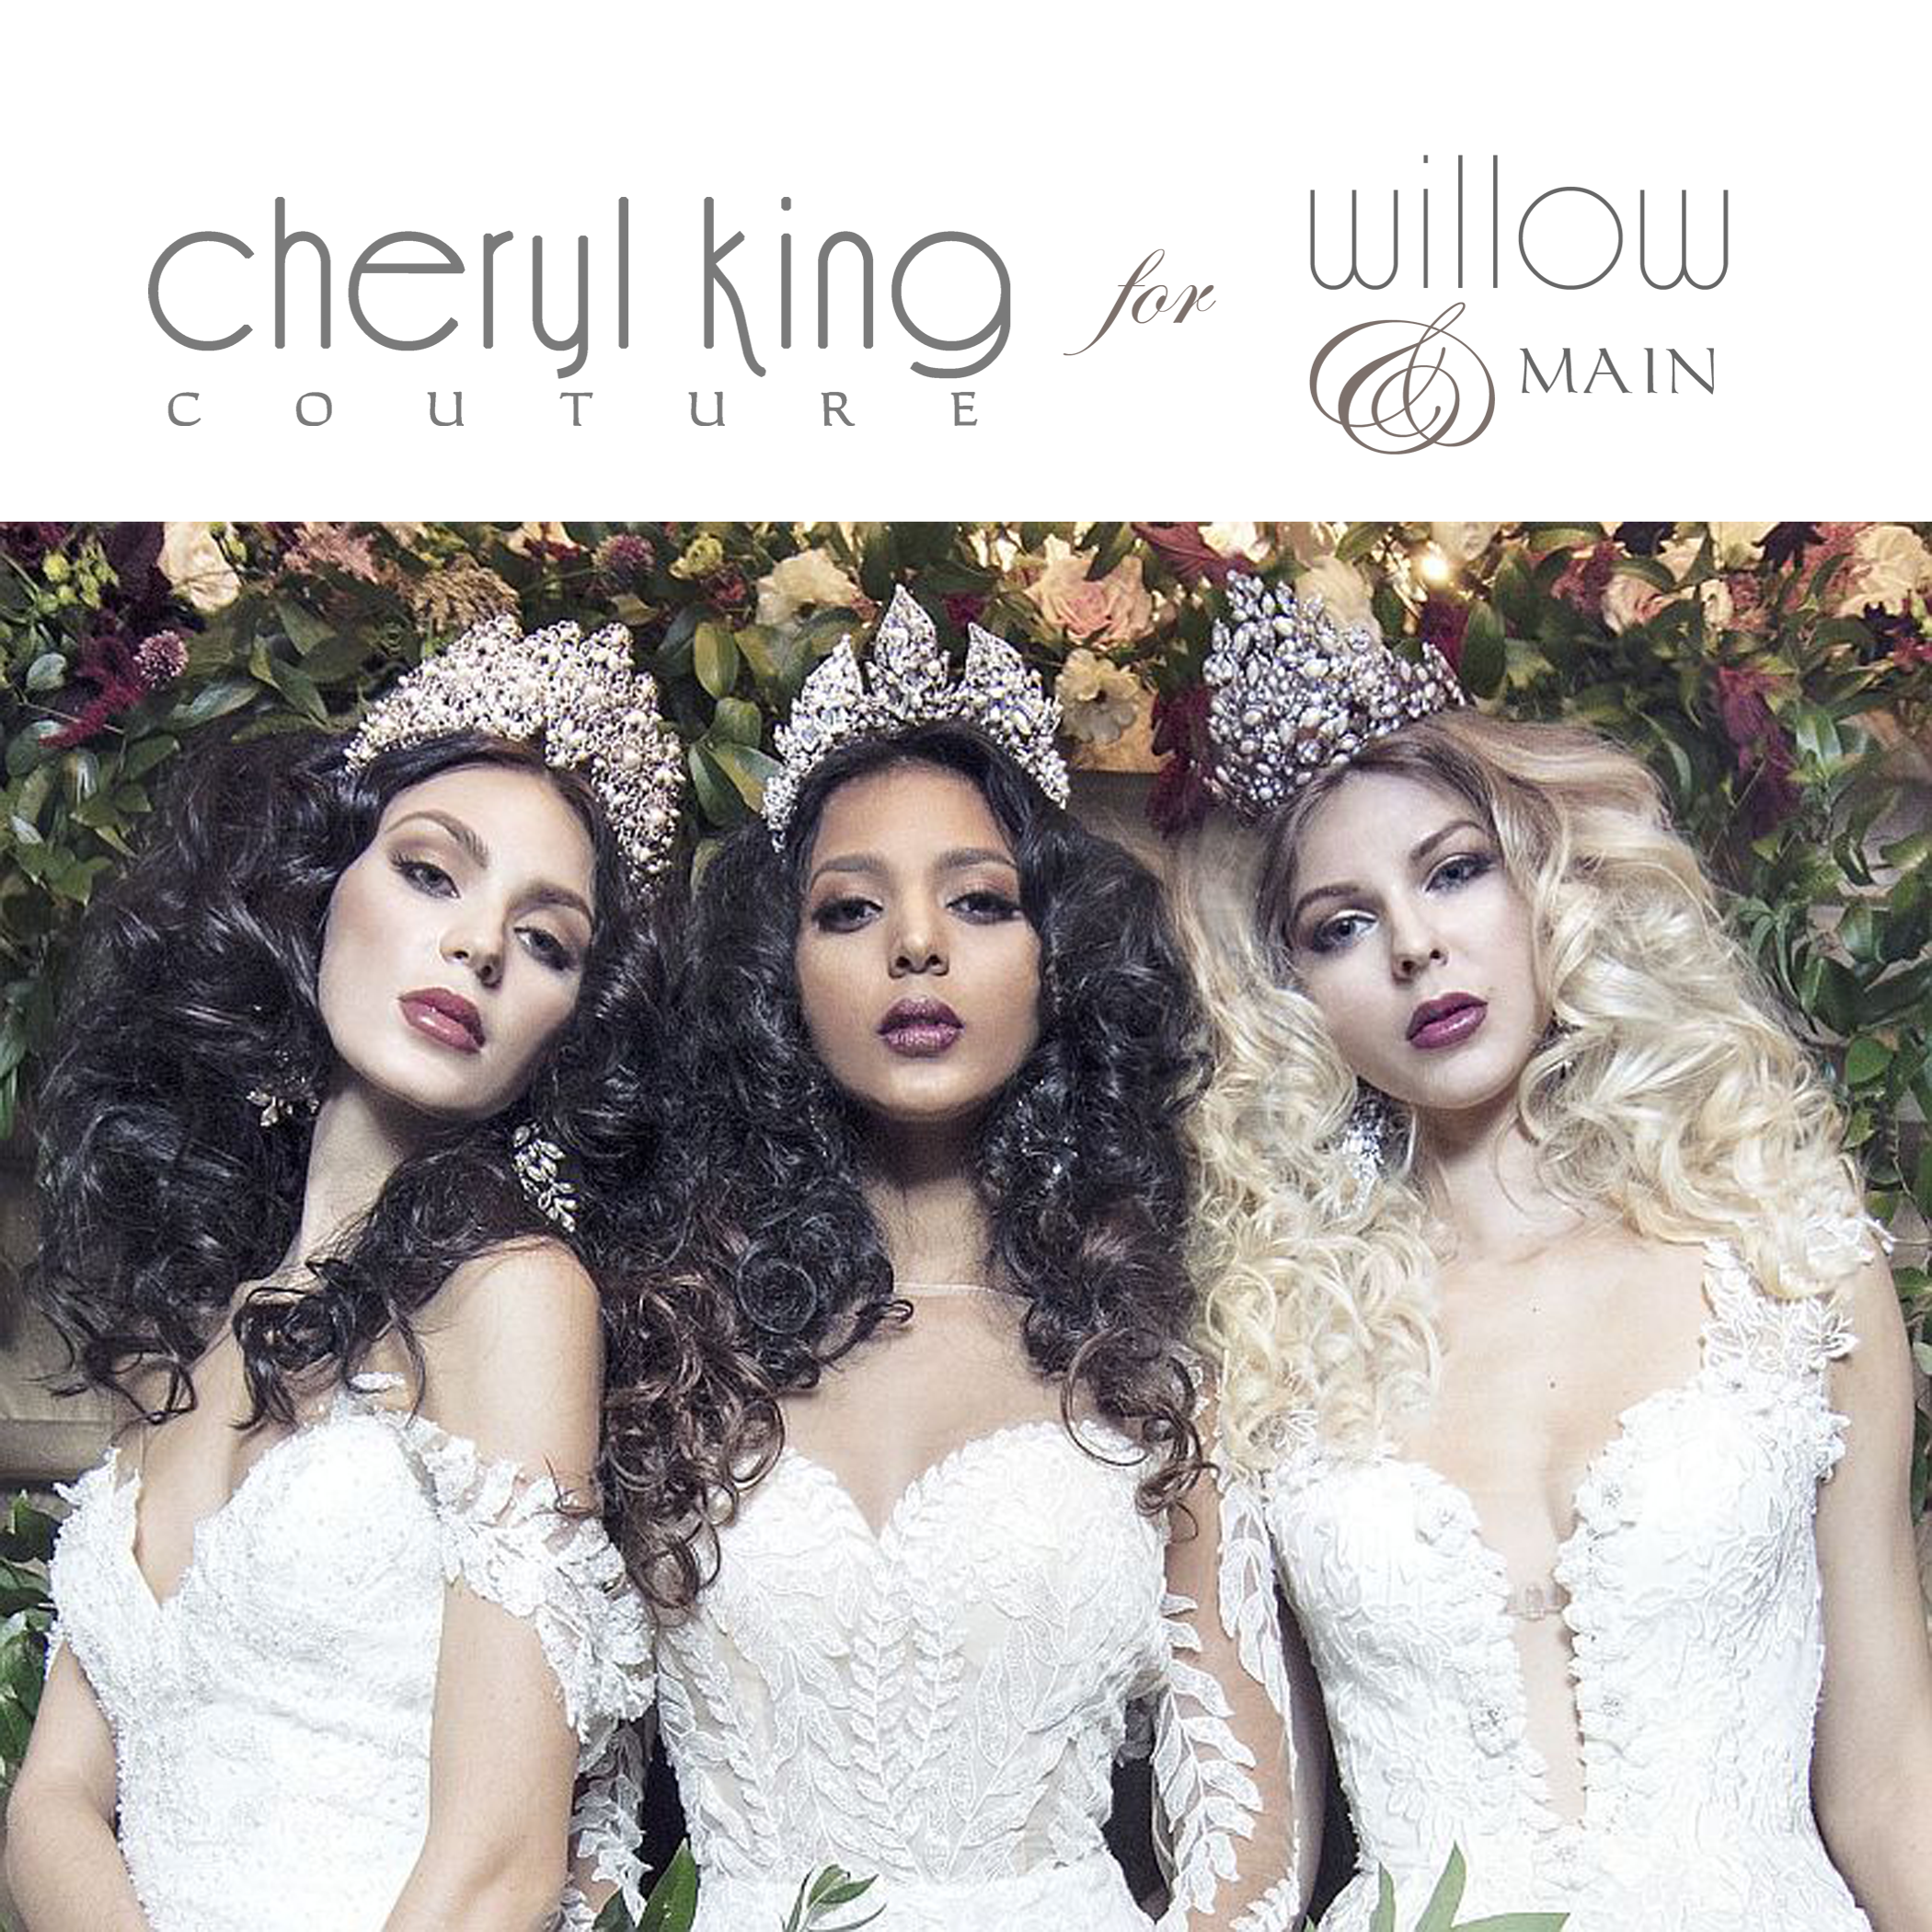 Designer Bridal Accessories by Cheryl King Couture were chosen by Yumi Katsura Couture for their campaign